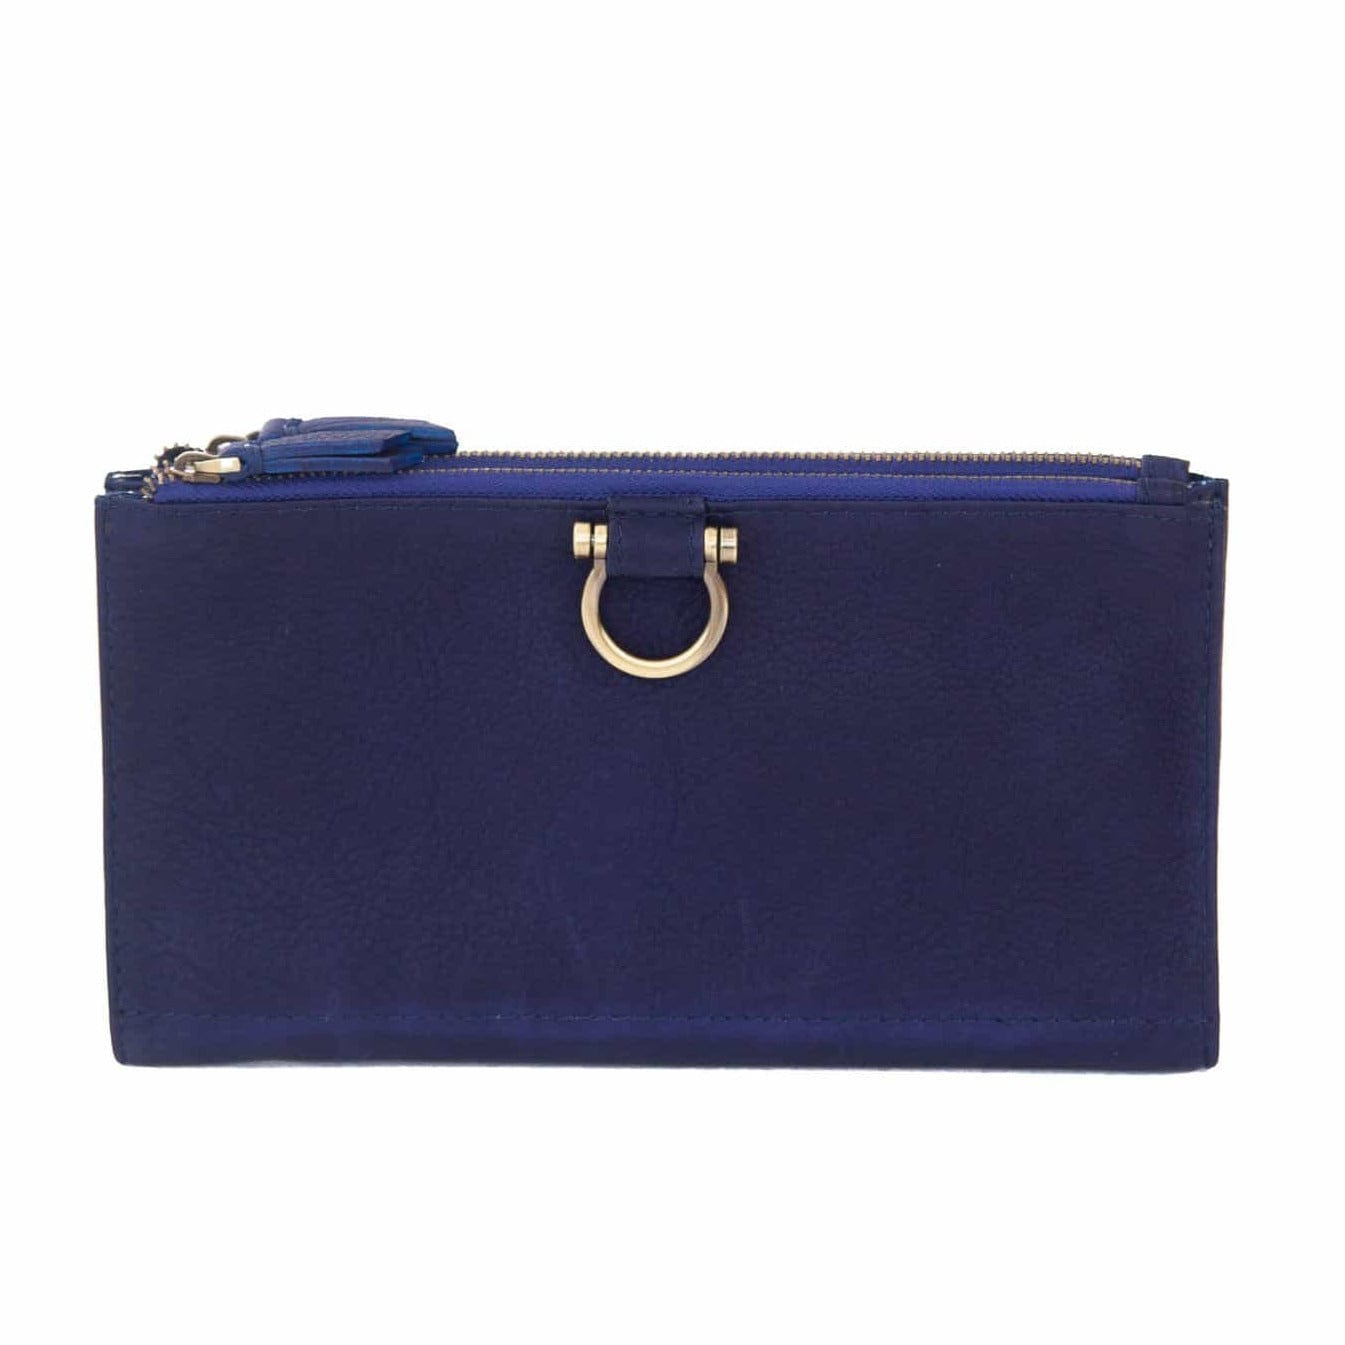 Parker Deluxe Wristlet - Navy Raw Leather | Sapahn.